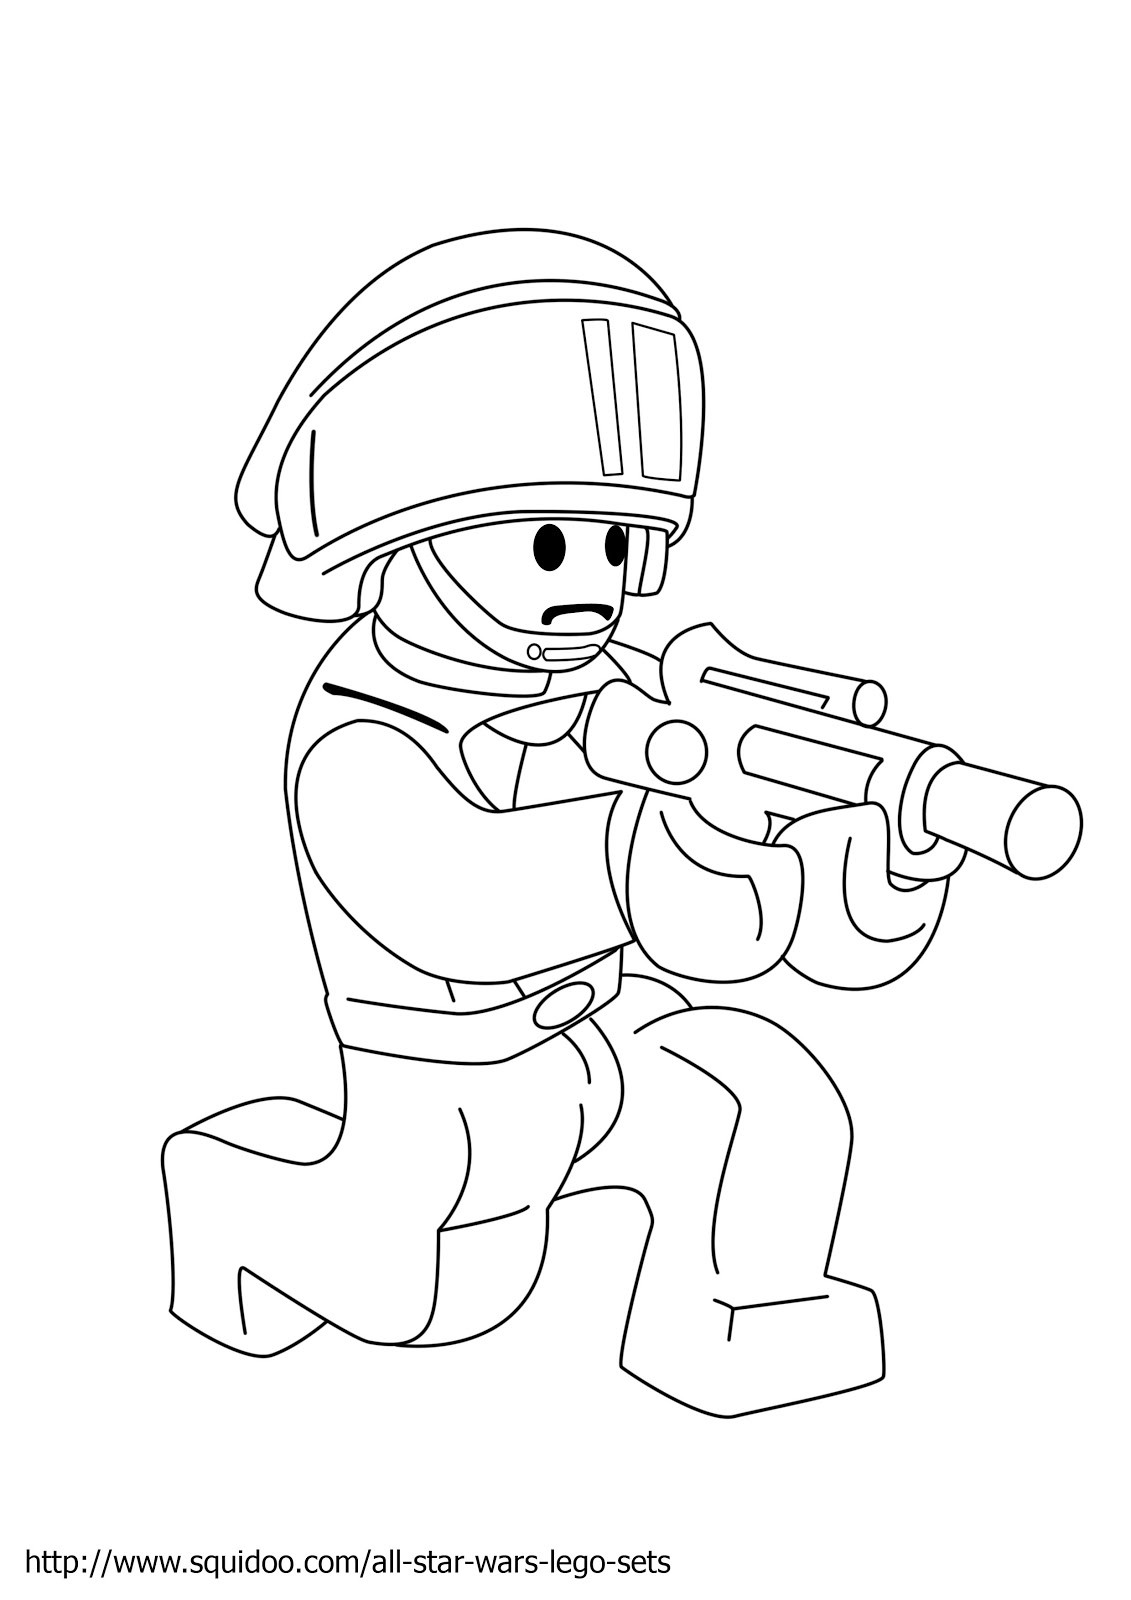 Coloring Pages For Boys Lego
 Lego Star Wars coloring pages